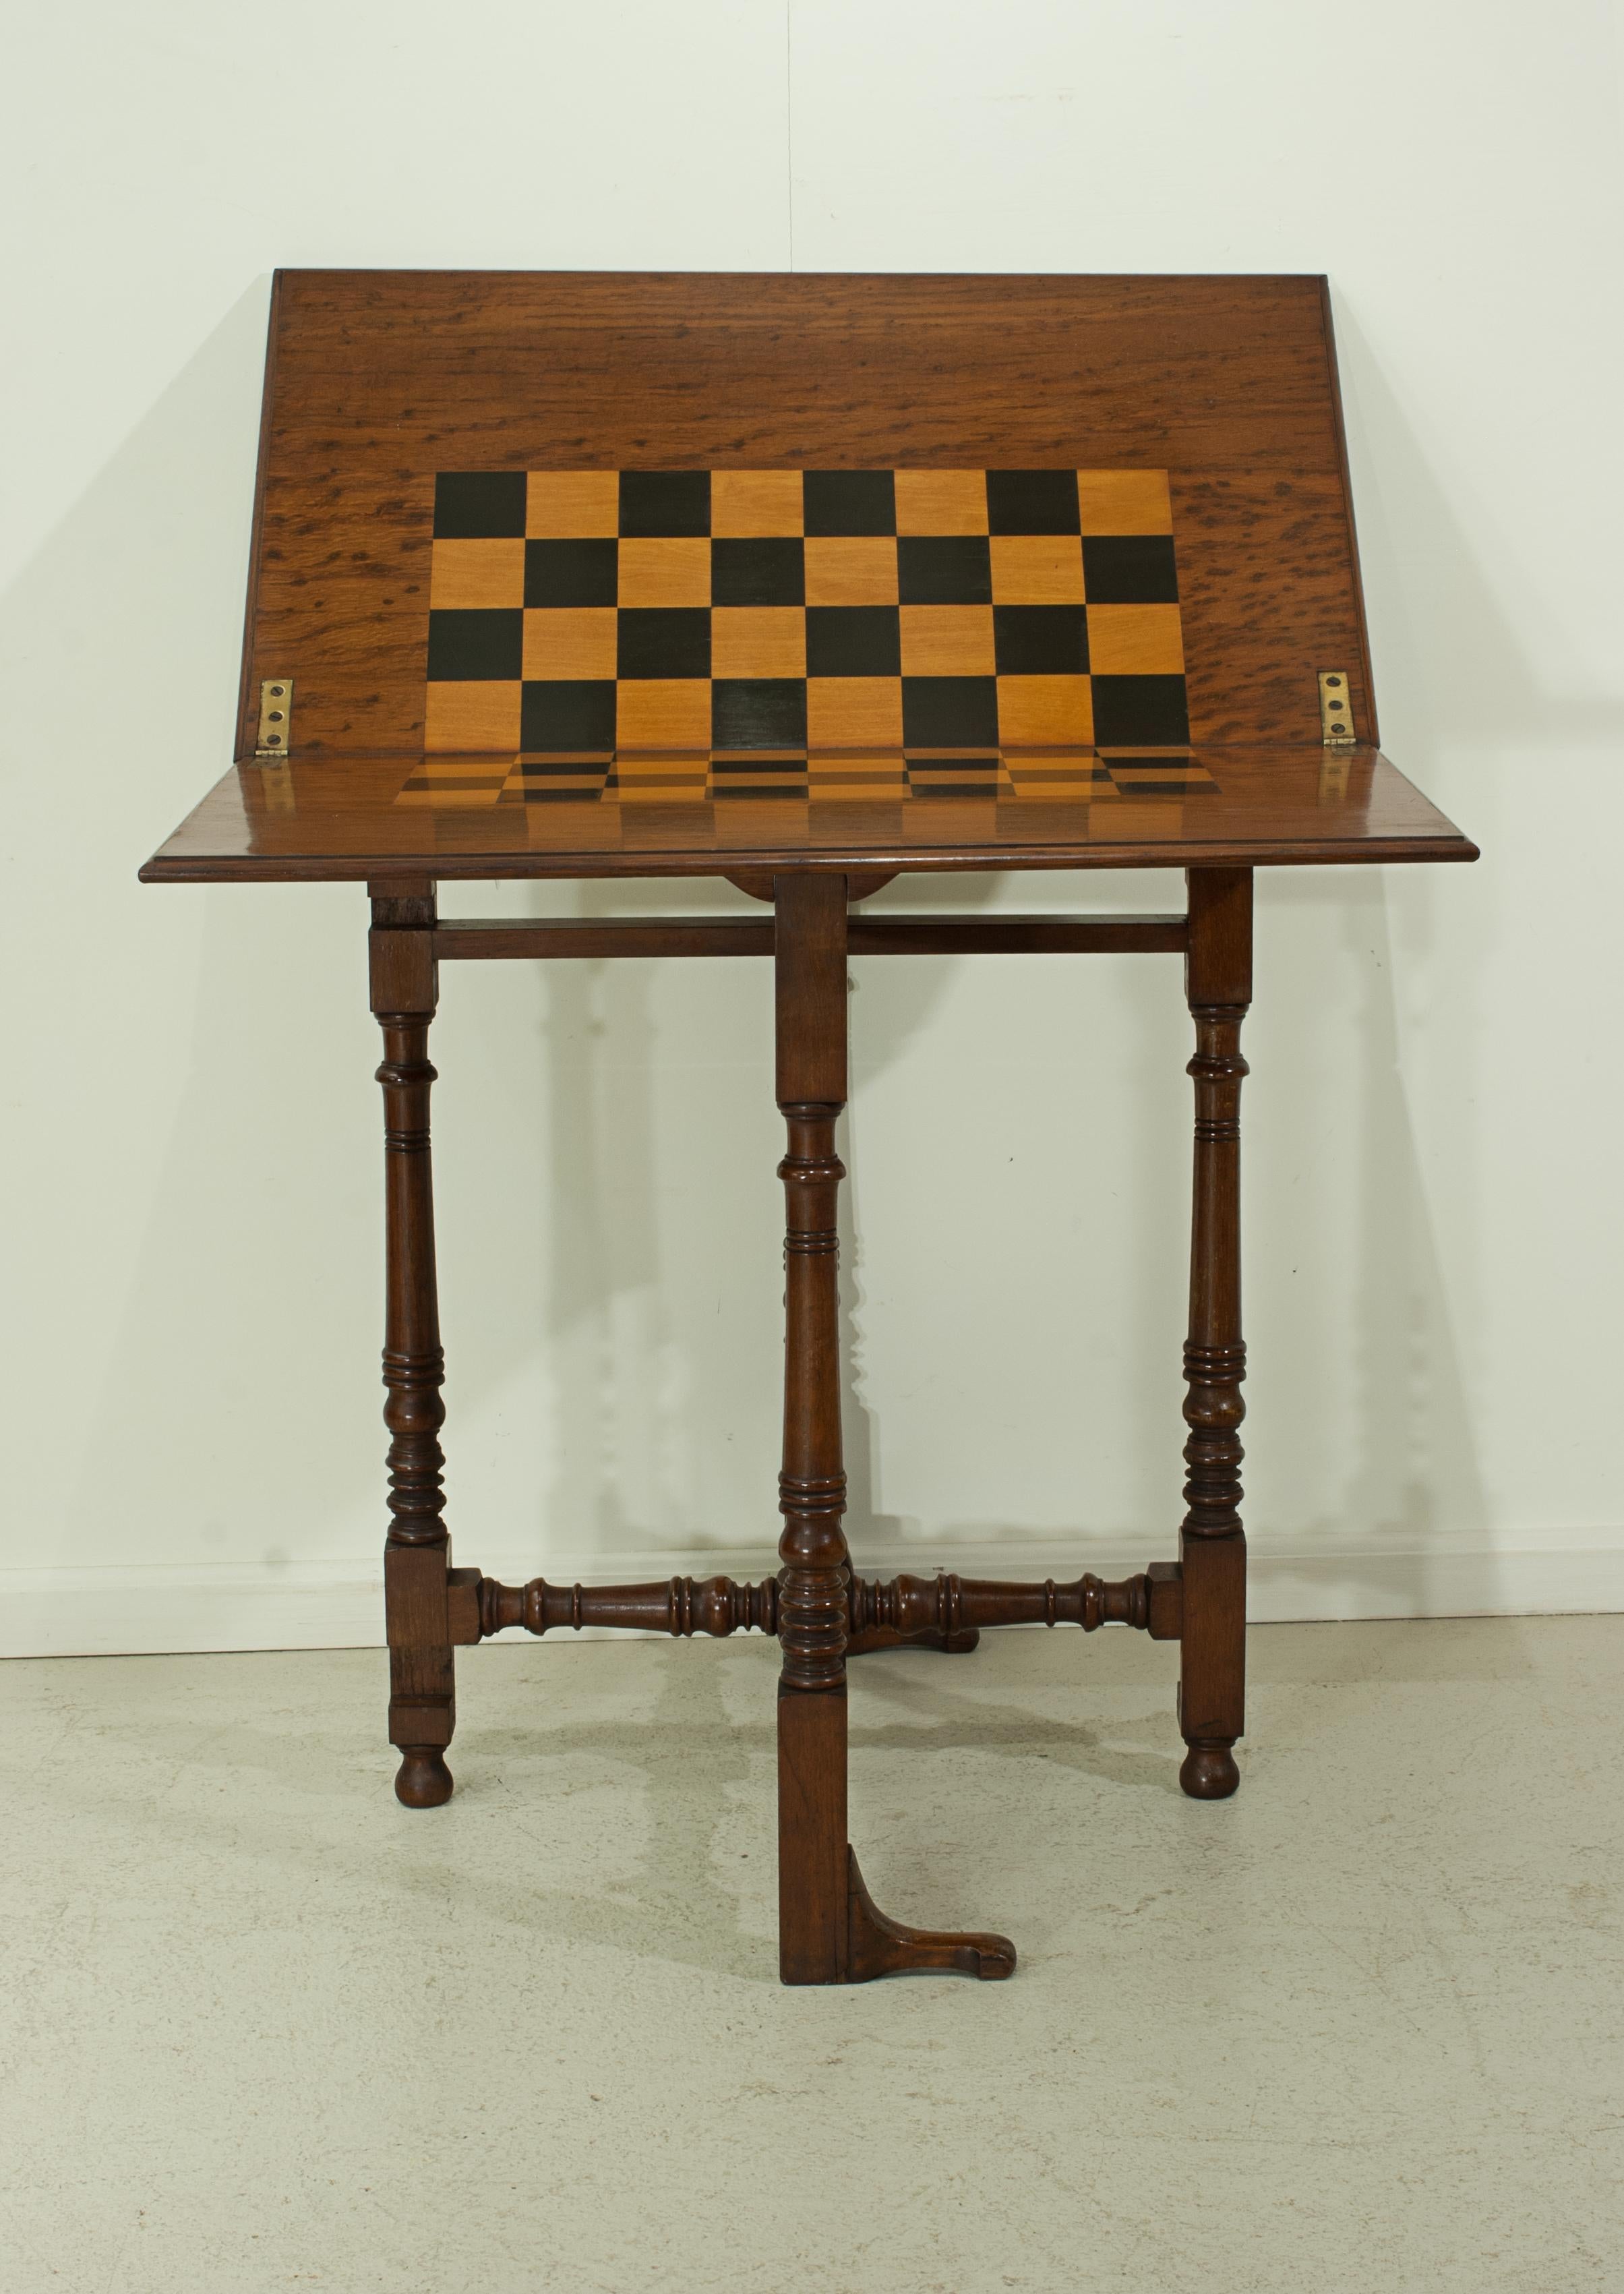 Charles Baker's folding chess table.
An exceptional folding chess or draughts table made of oak. The table with brass plate reading 